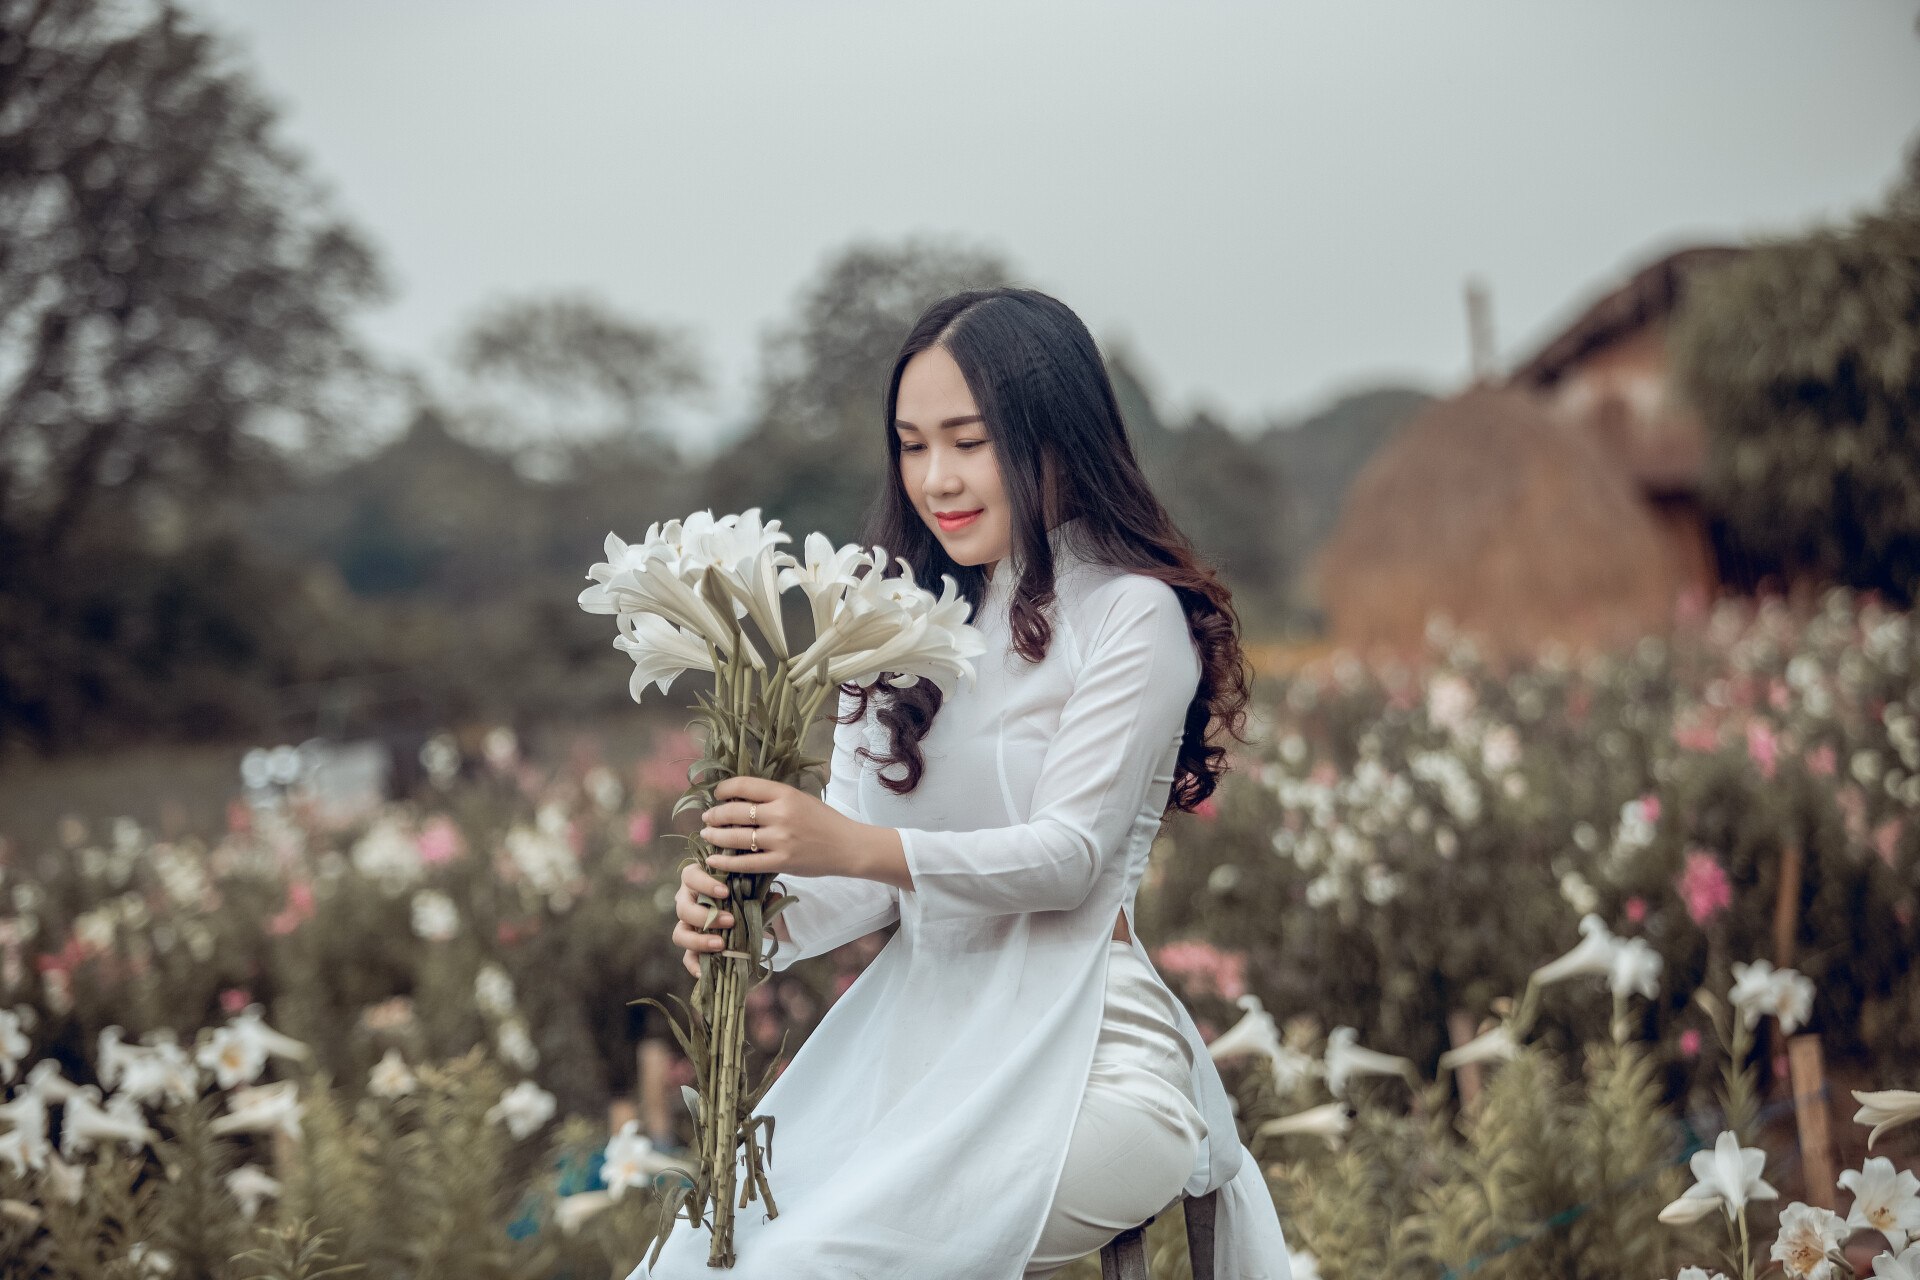 How To Marry Chinese Culture Dating? – Detailed Guide